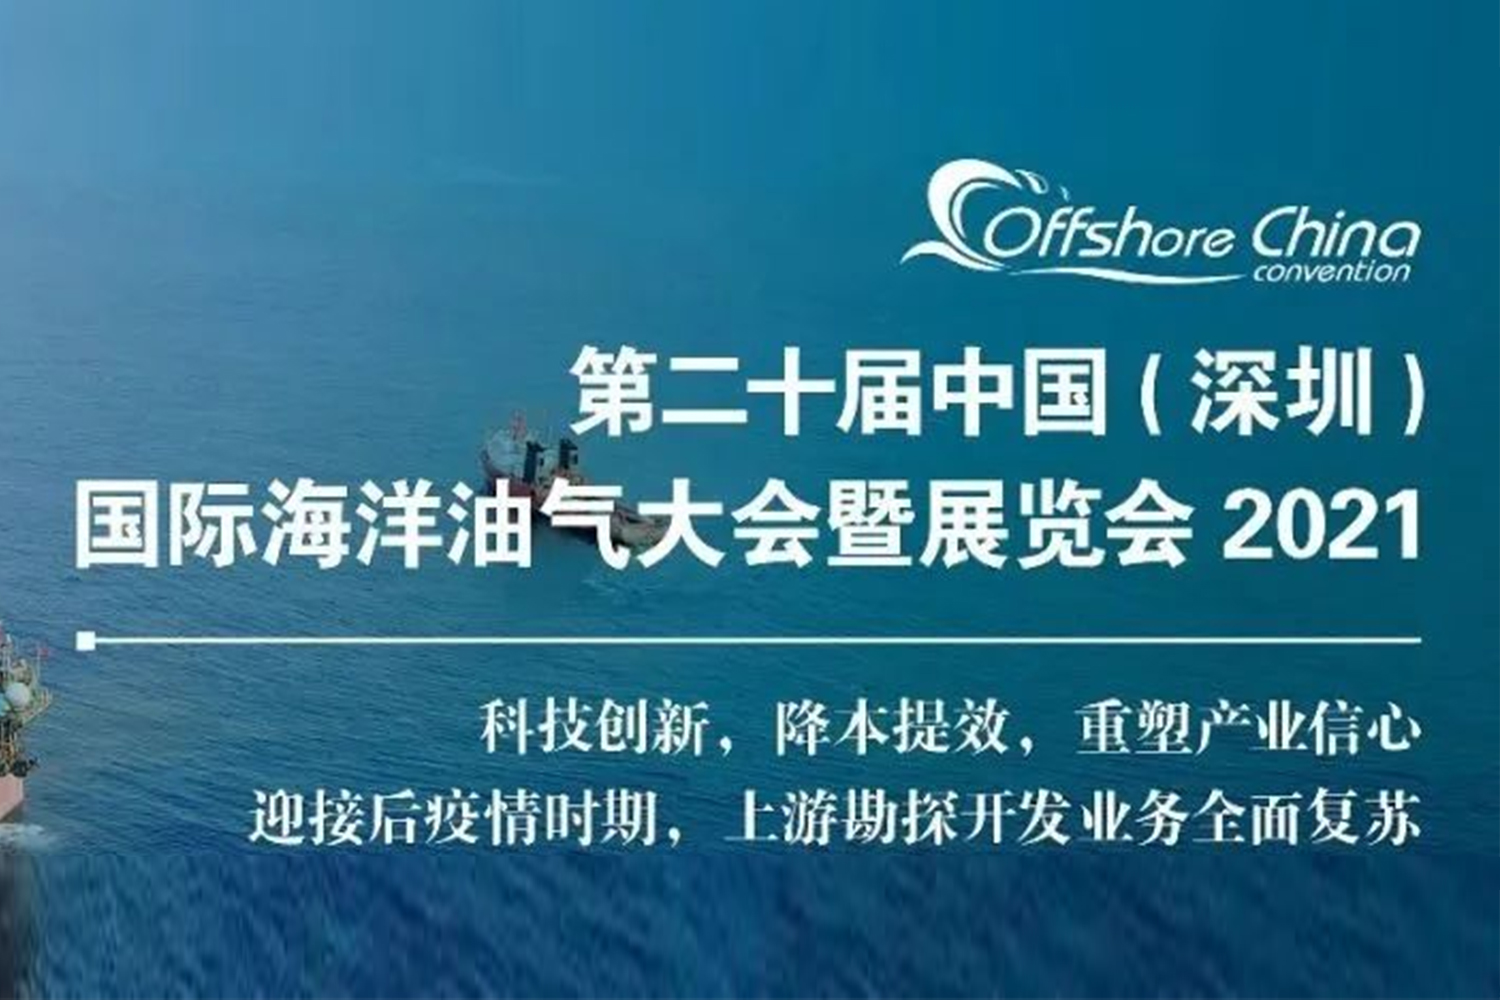 The first exhibition in autumn | The 20th China (Shenzhen) International Offshore Oil & Gas Conference and Exhibition 2021